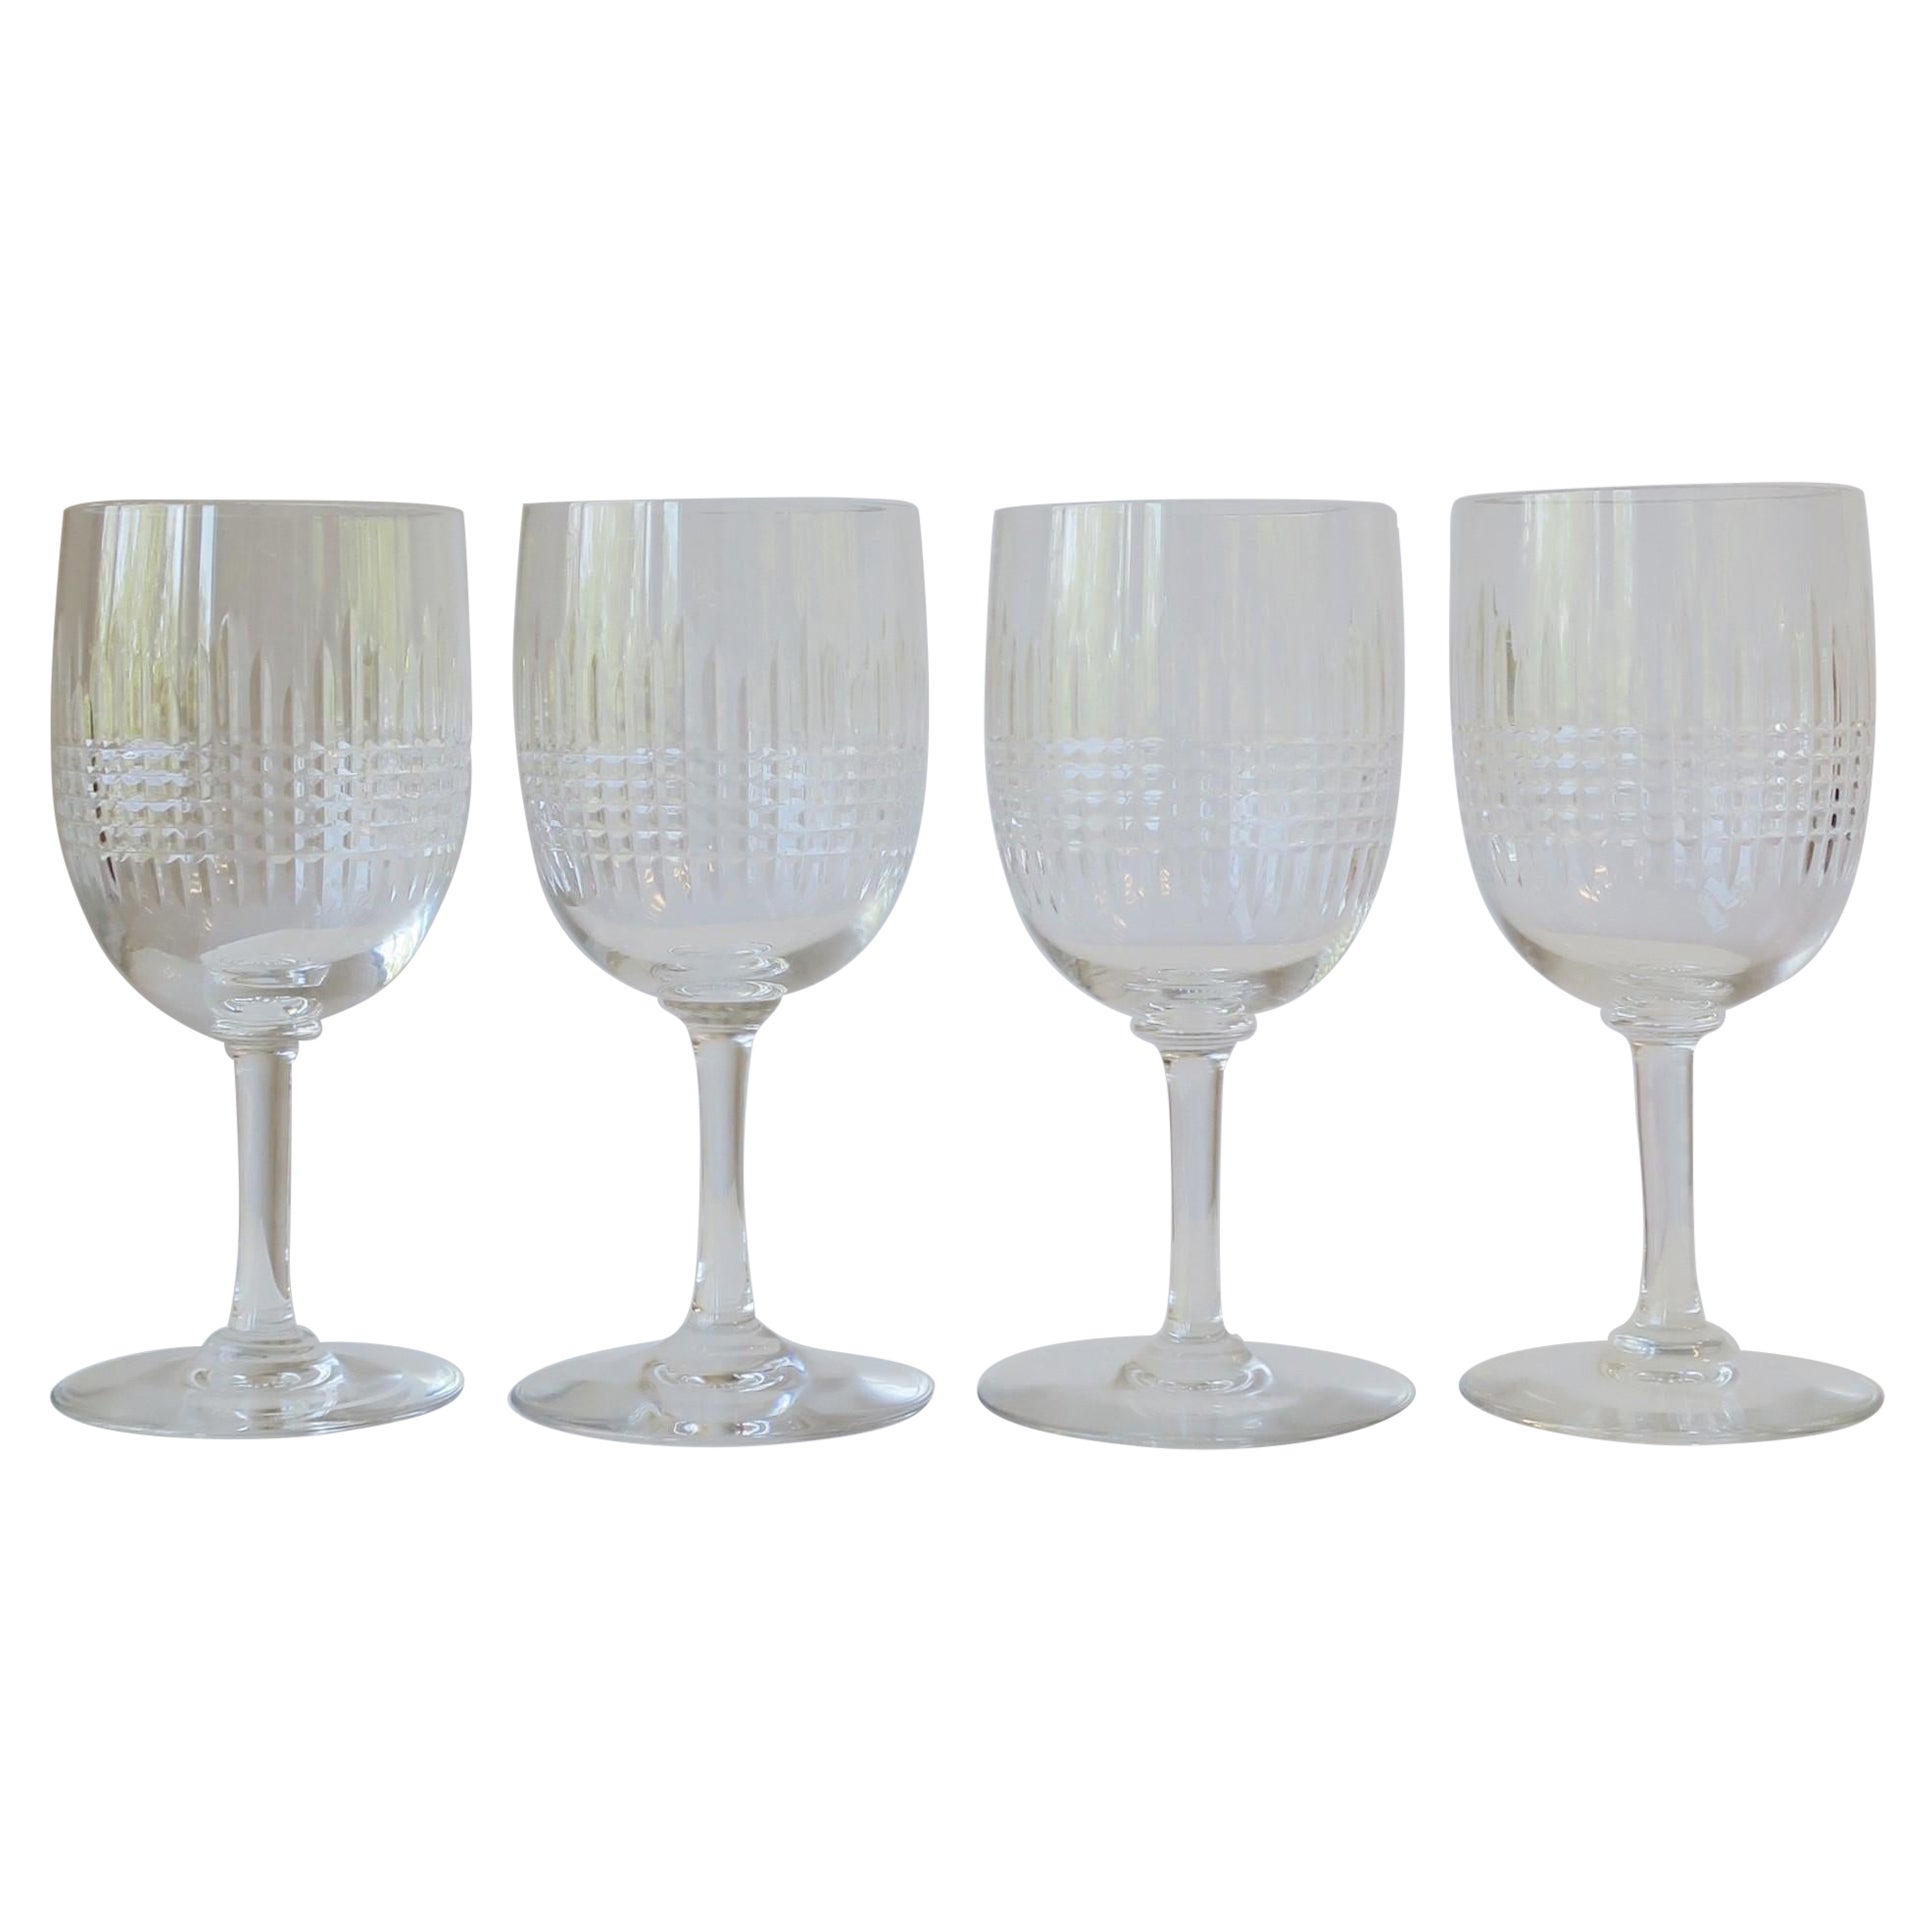 Baccarat French Cut Crystal Wine Glasses